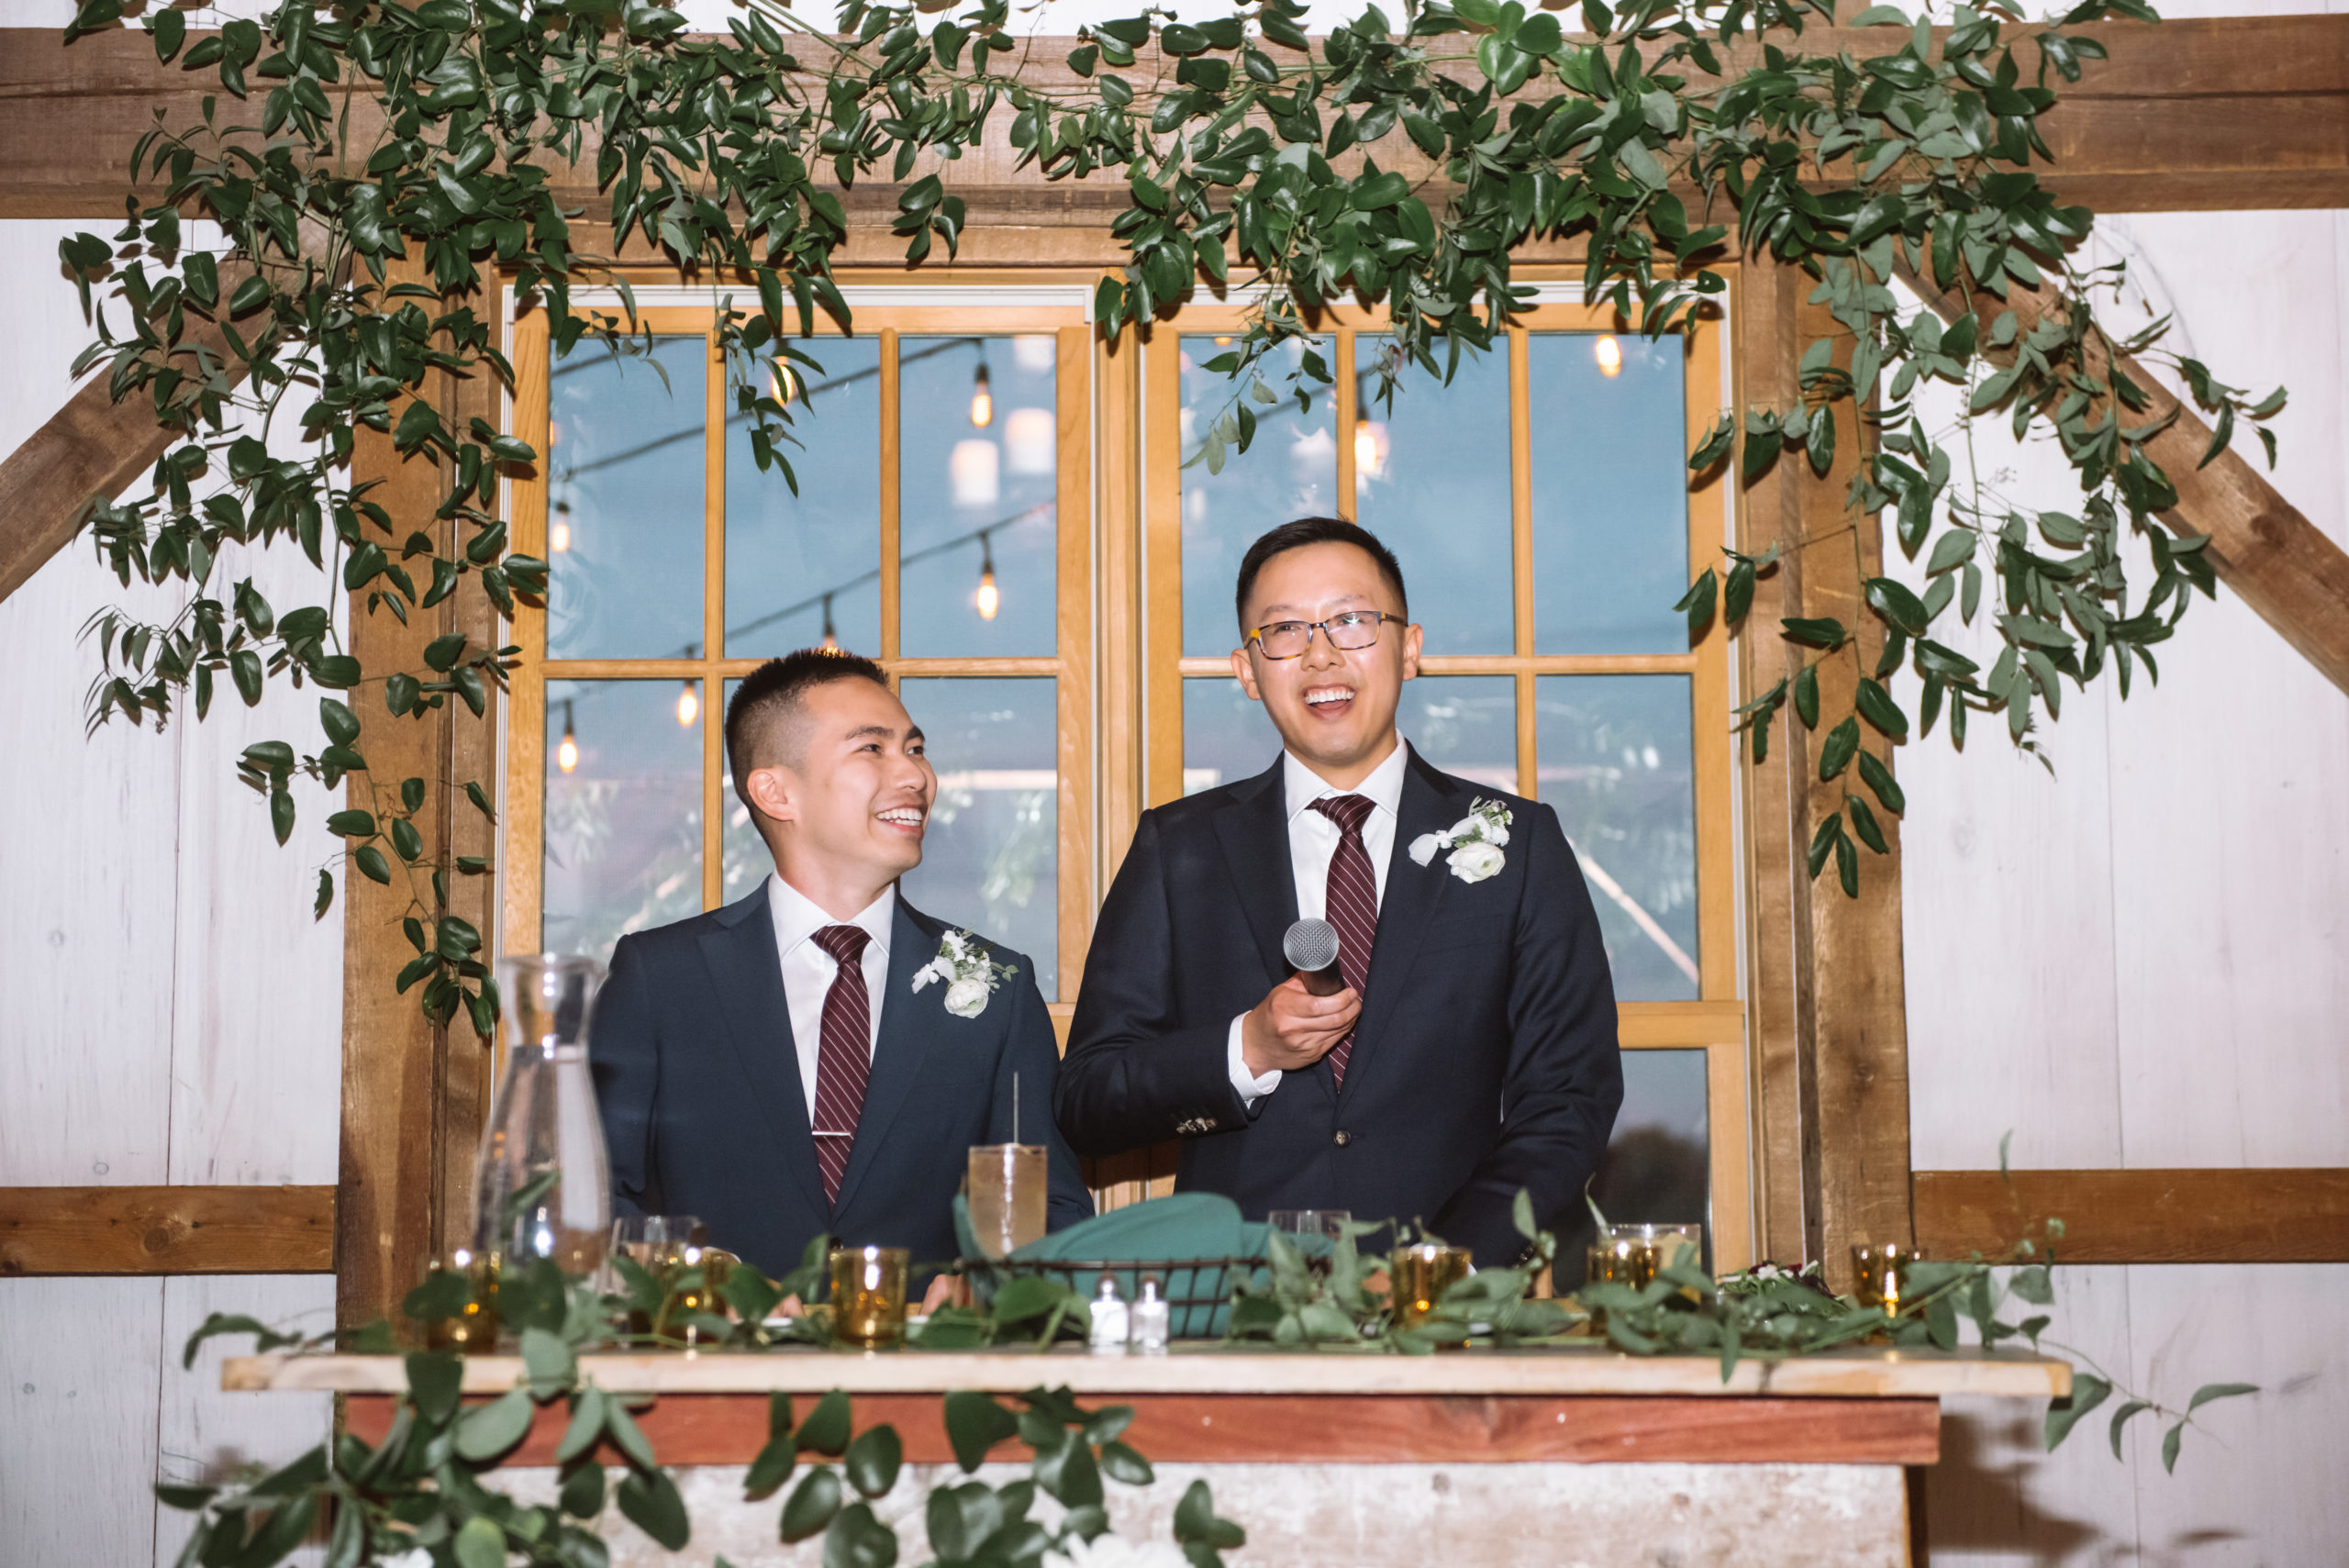 Two grooms standing about to give a speech to begin their reception. One groom is looking off to his right, mouth open in a smile. He is holding a microphone. His husband is standing to his right and is looking up towards him with a big smile on his face. They are standing at their couple head table which is decorated with greenery as well as the wooden beam above them.